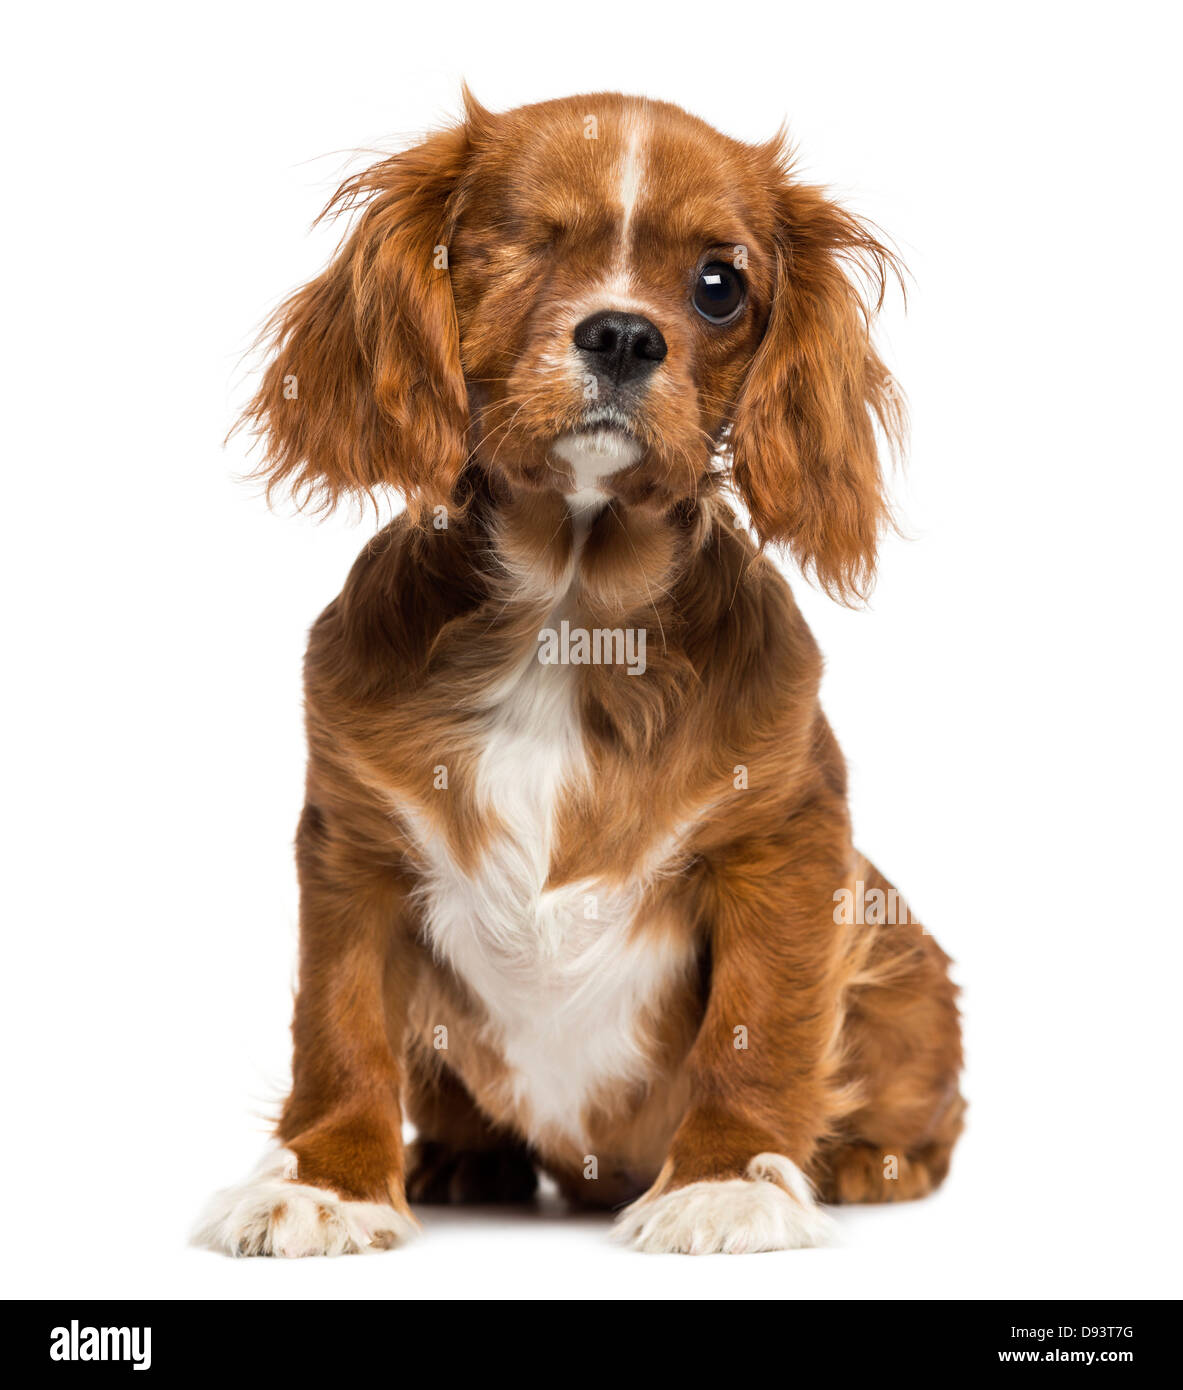 One-eyed Cavalier King Charles puppy sitting, 4 months old, against white background Stock Photo